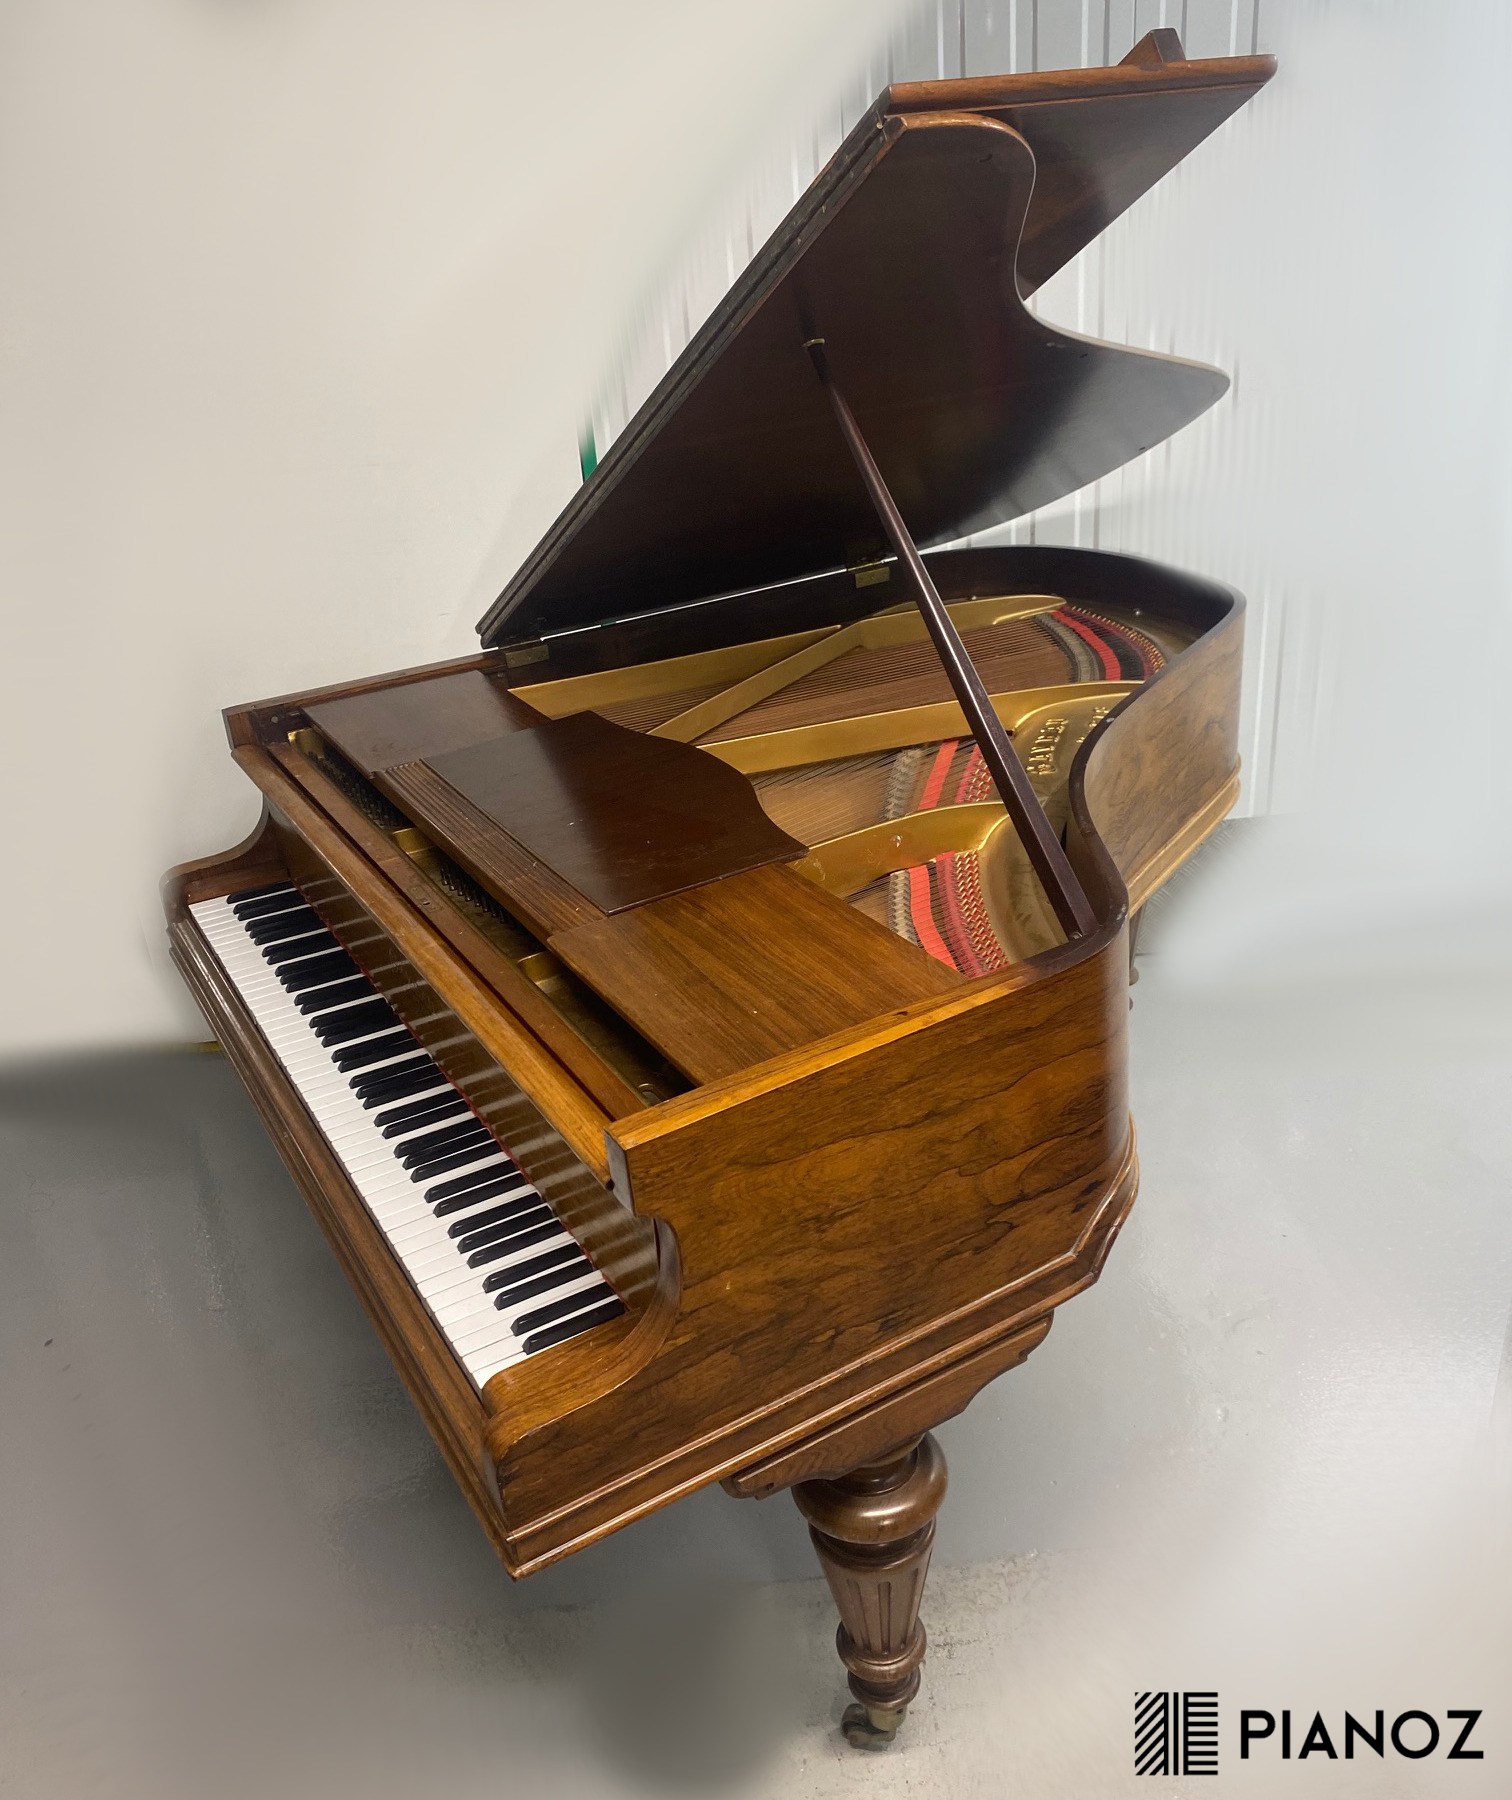 Gaveau French Baby Grand Piano piano for sale in UK